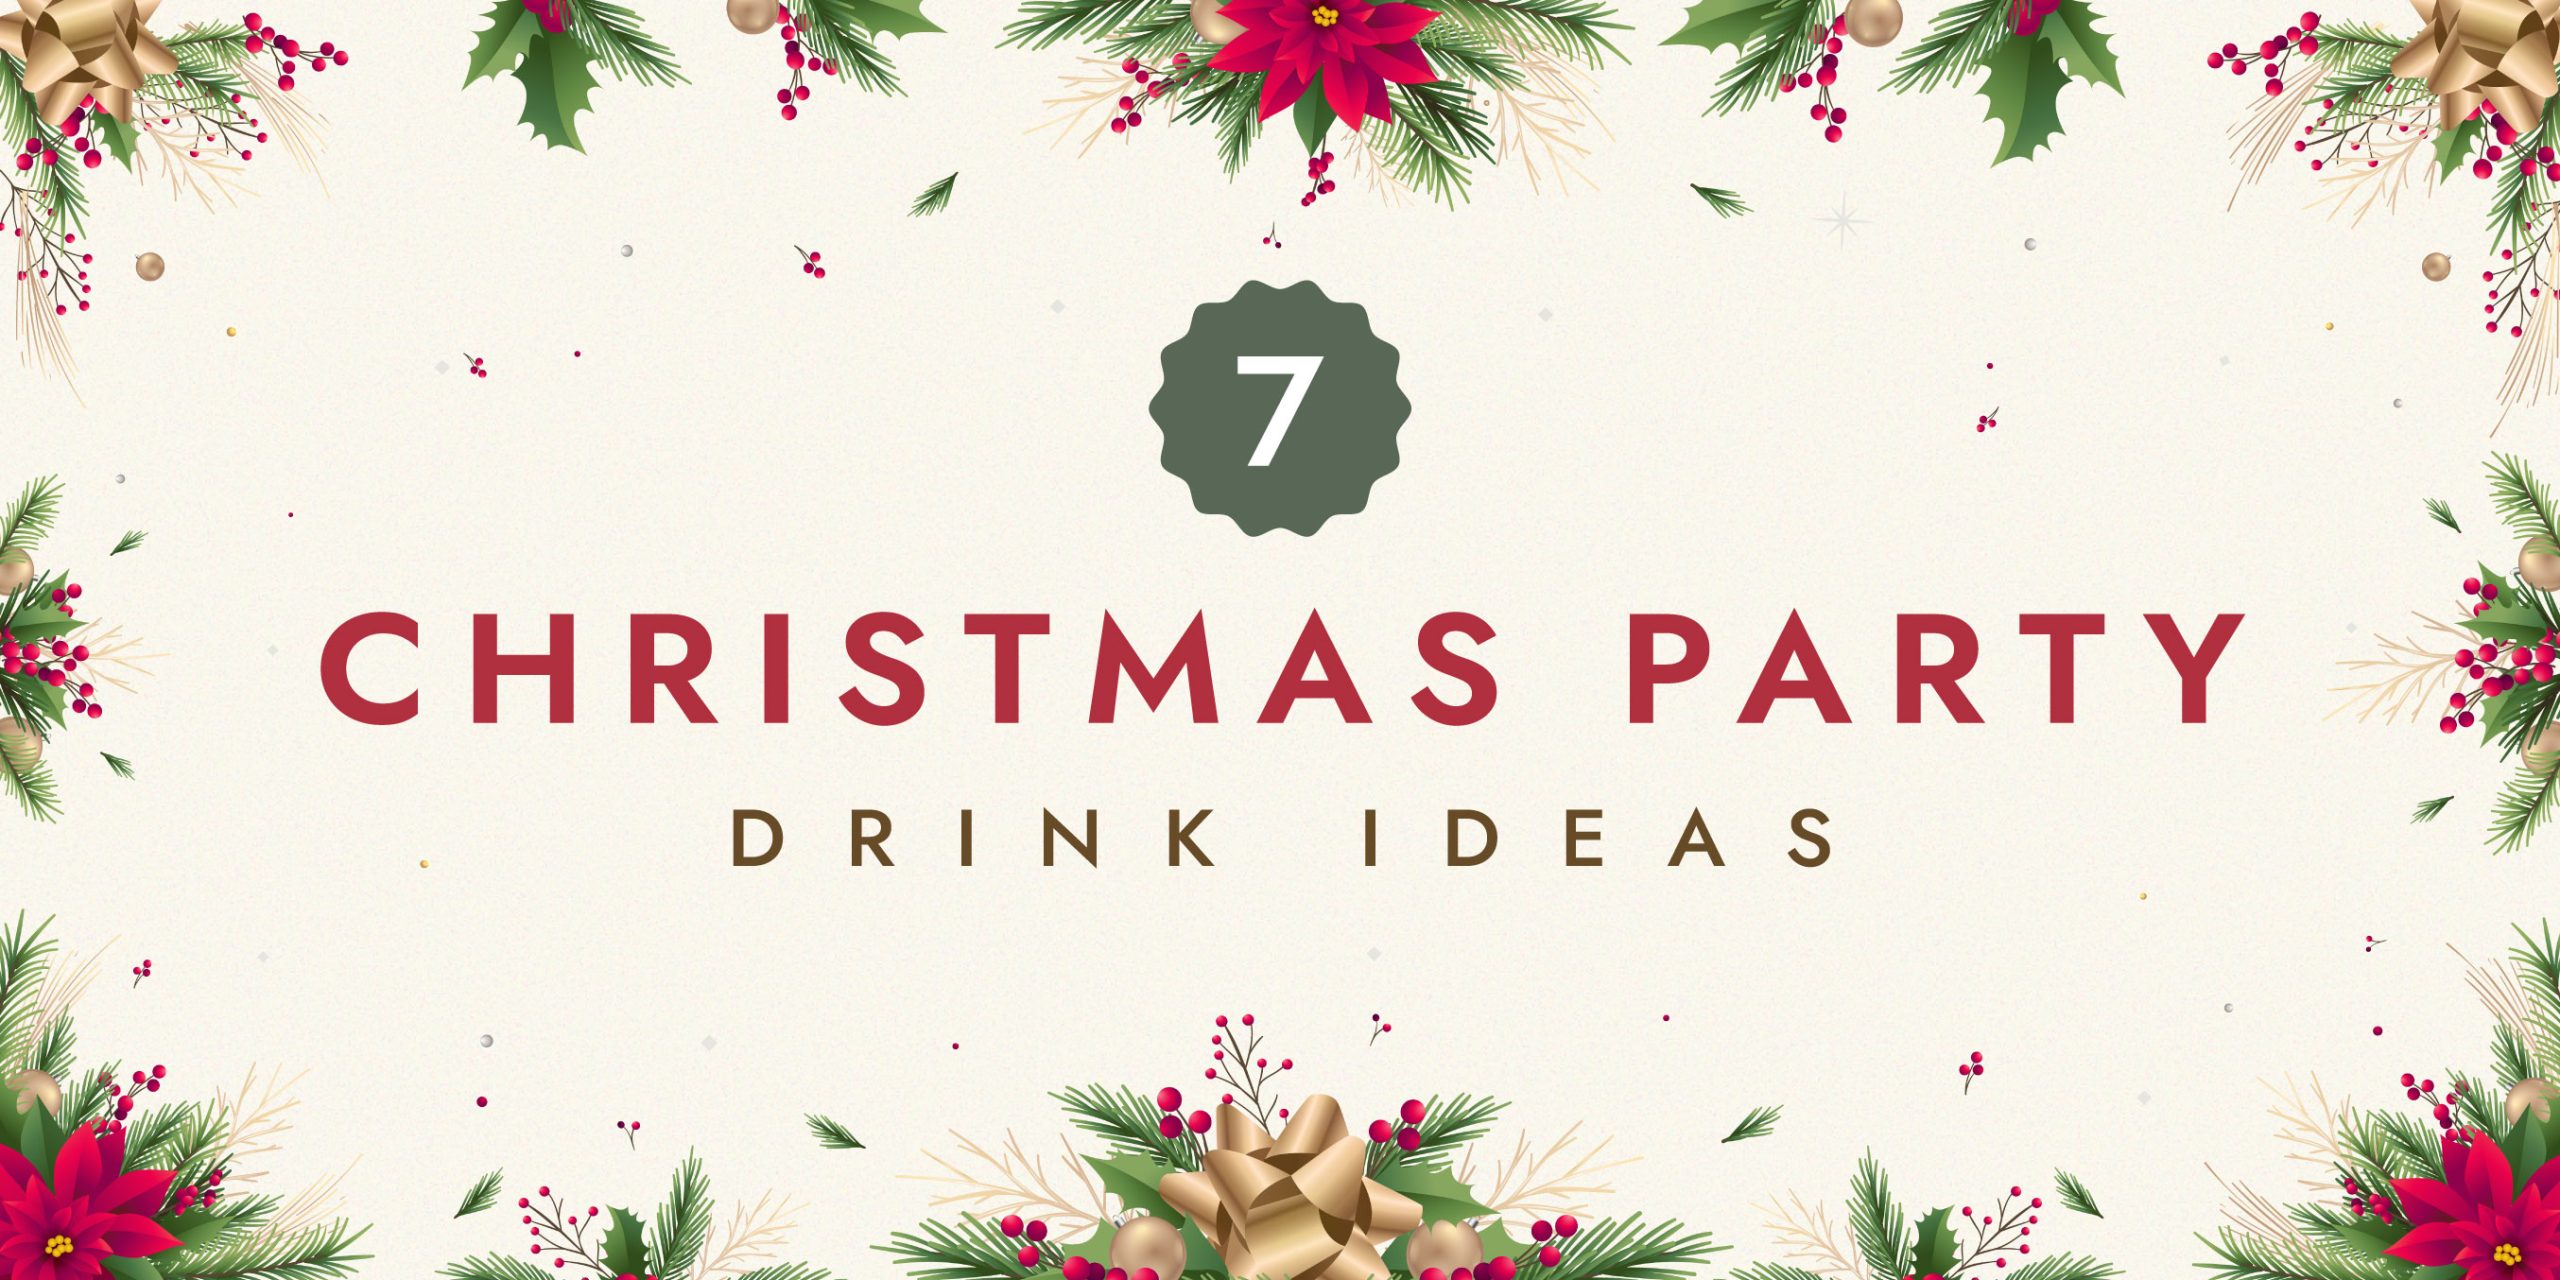 Drink Ideas For Christmas Party